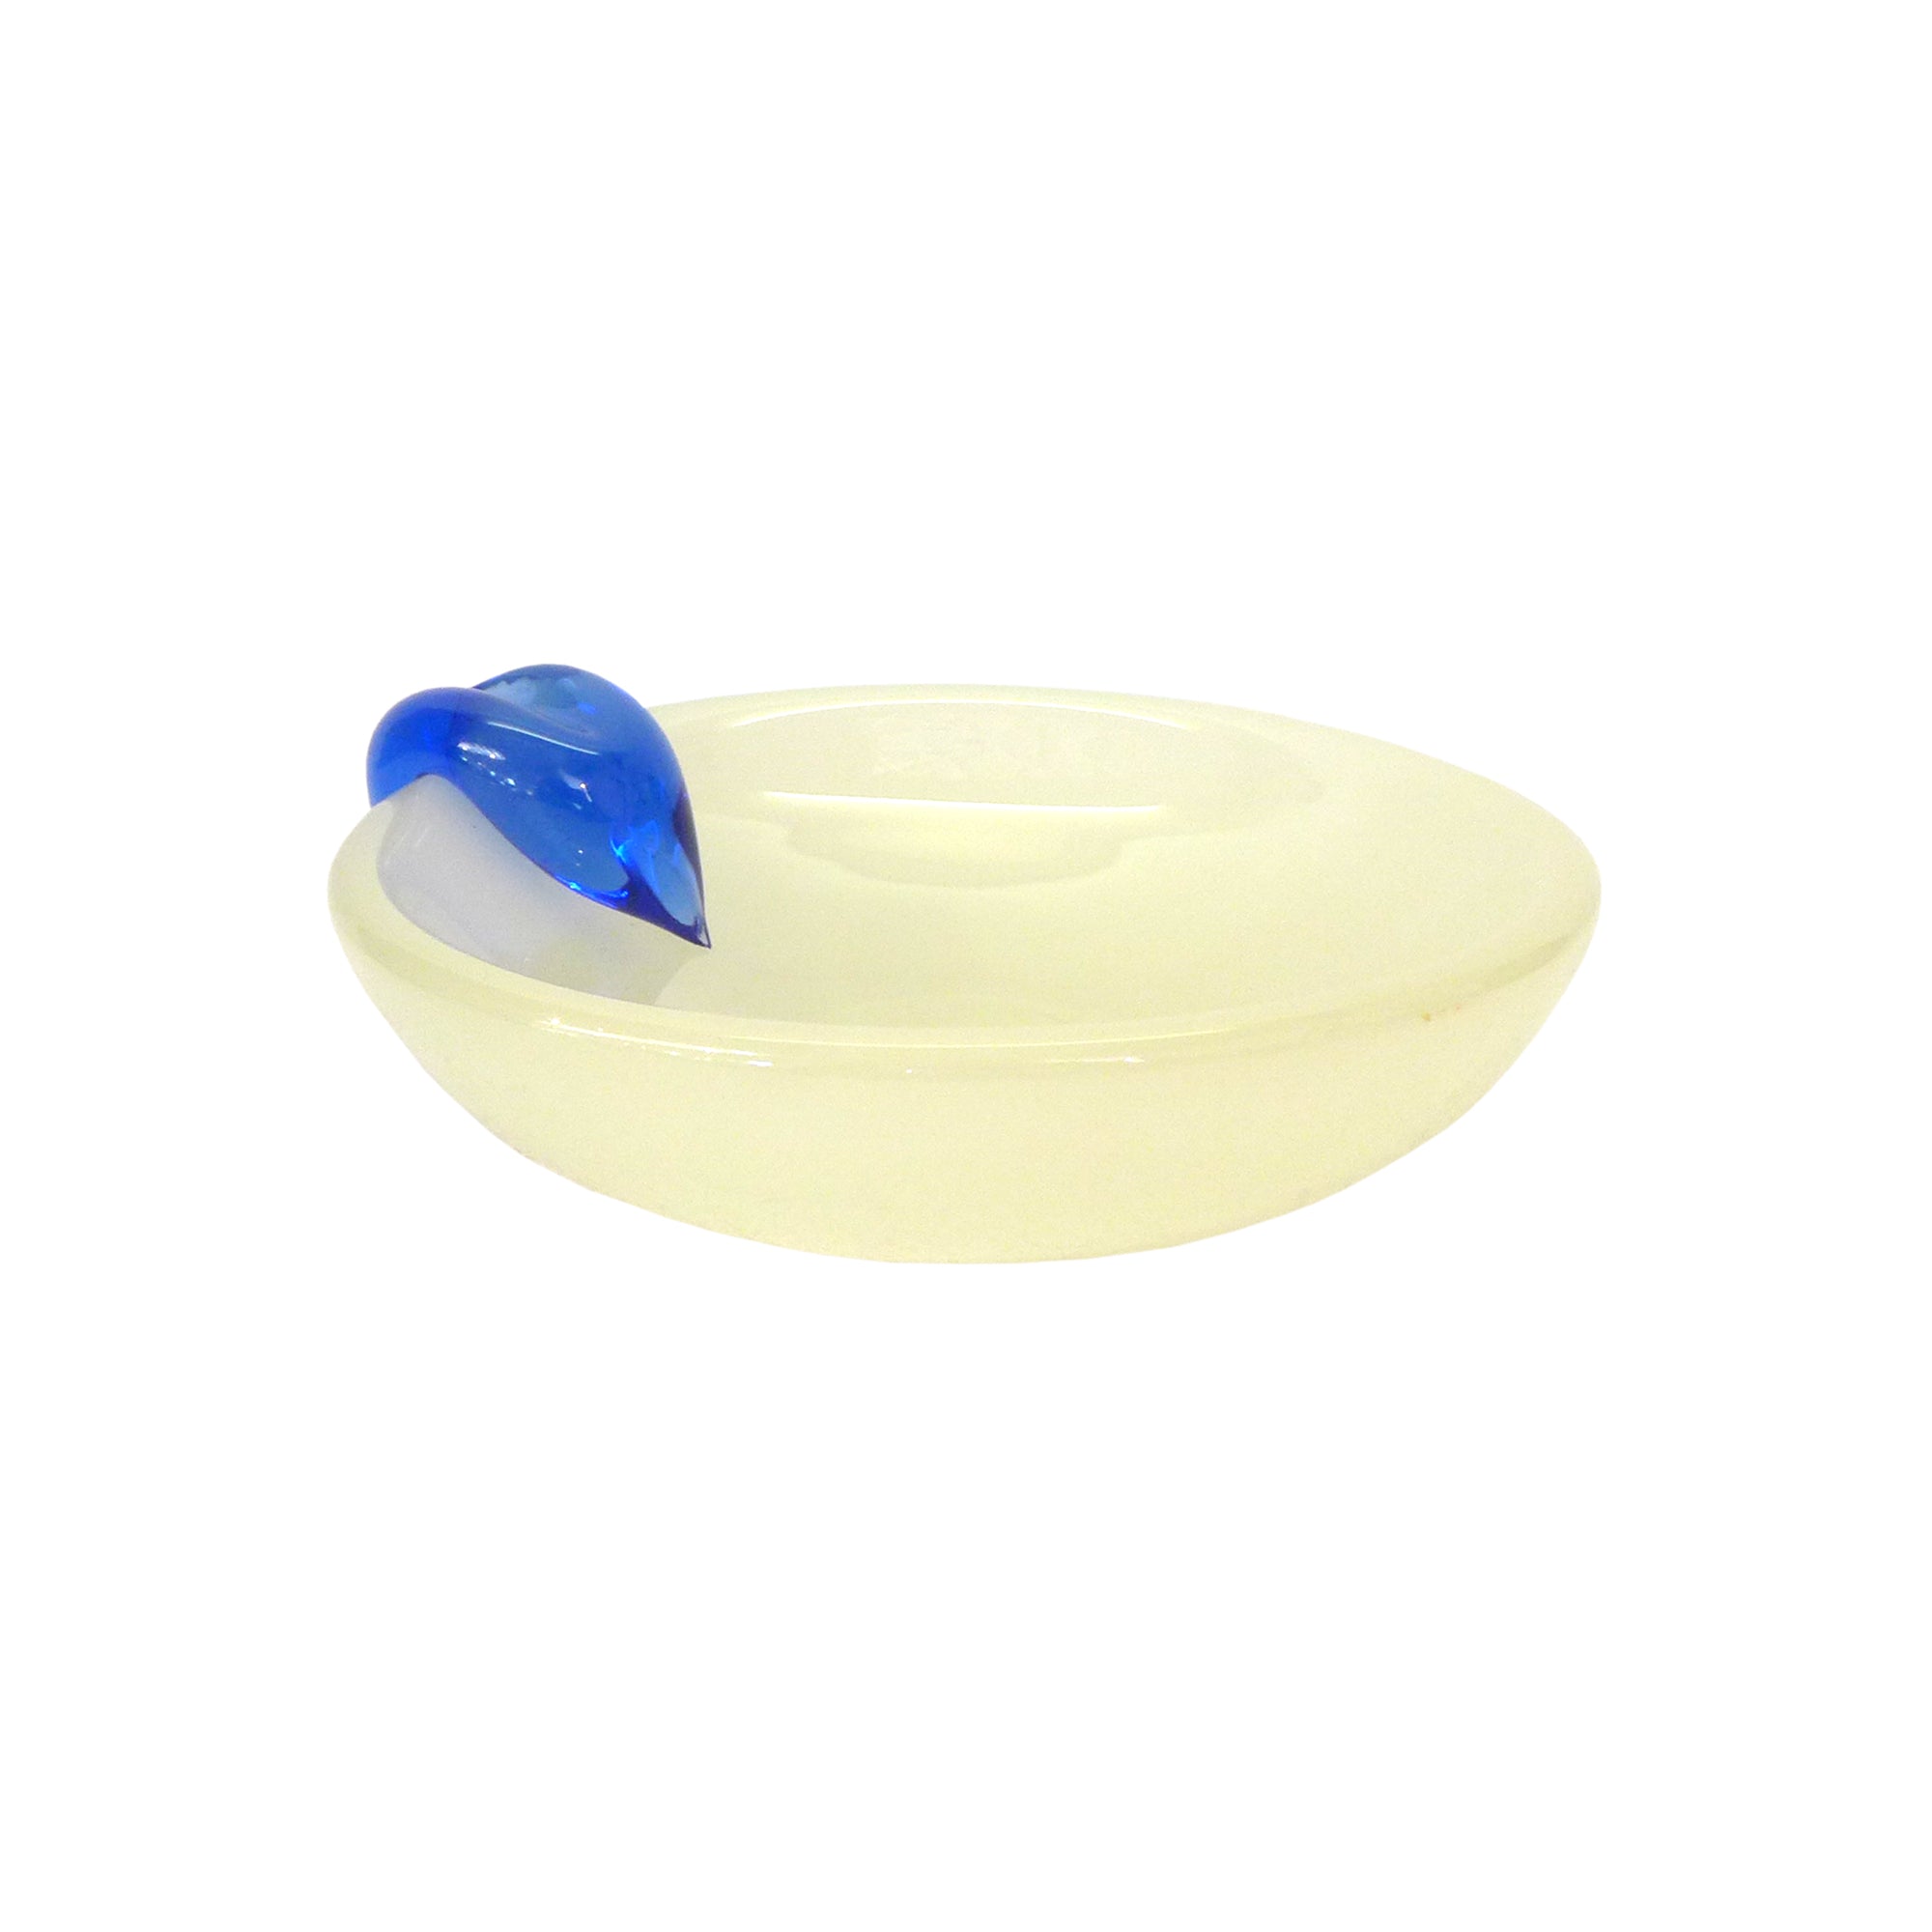 Glass Ashtray with Blue Leaf